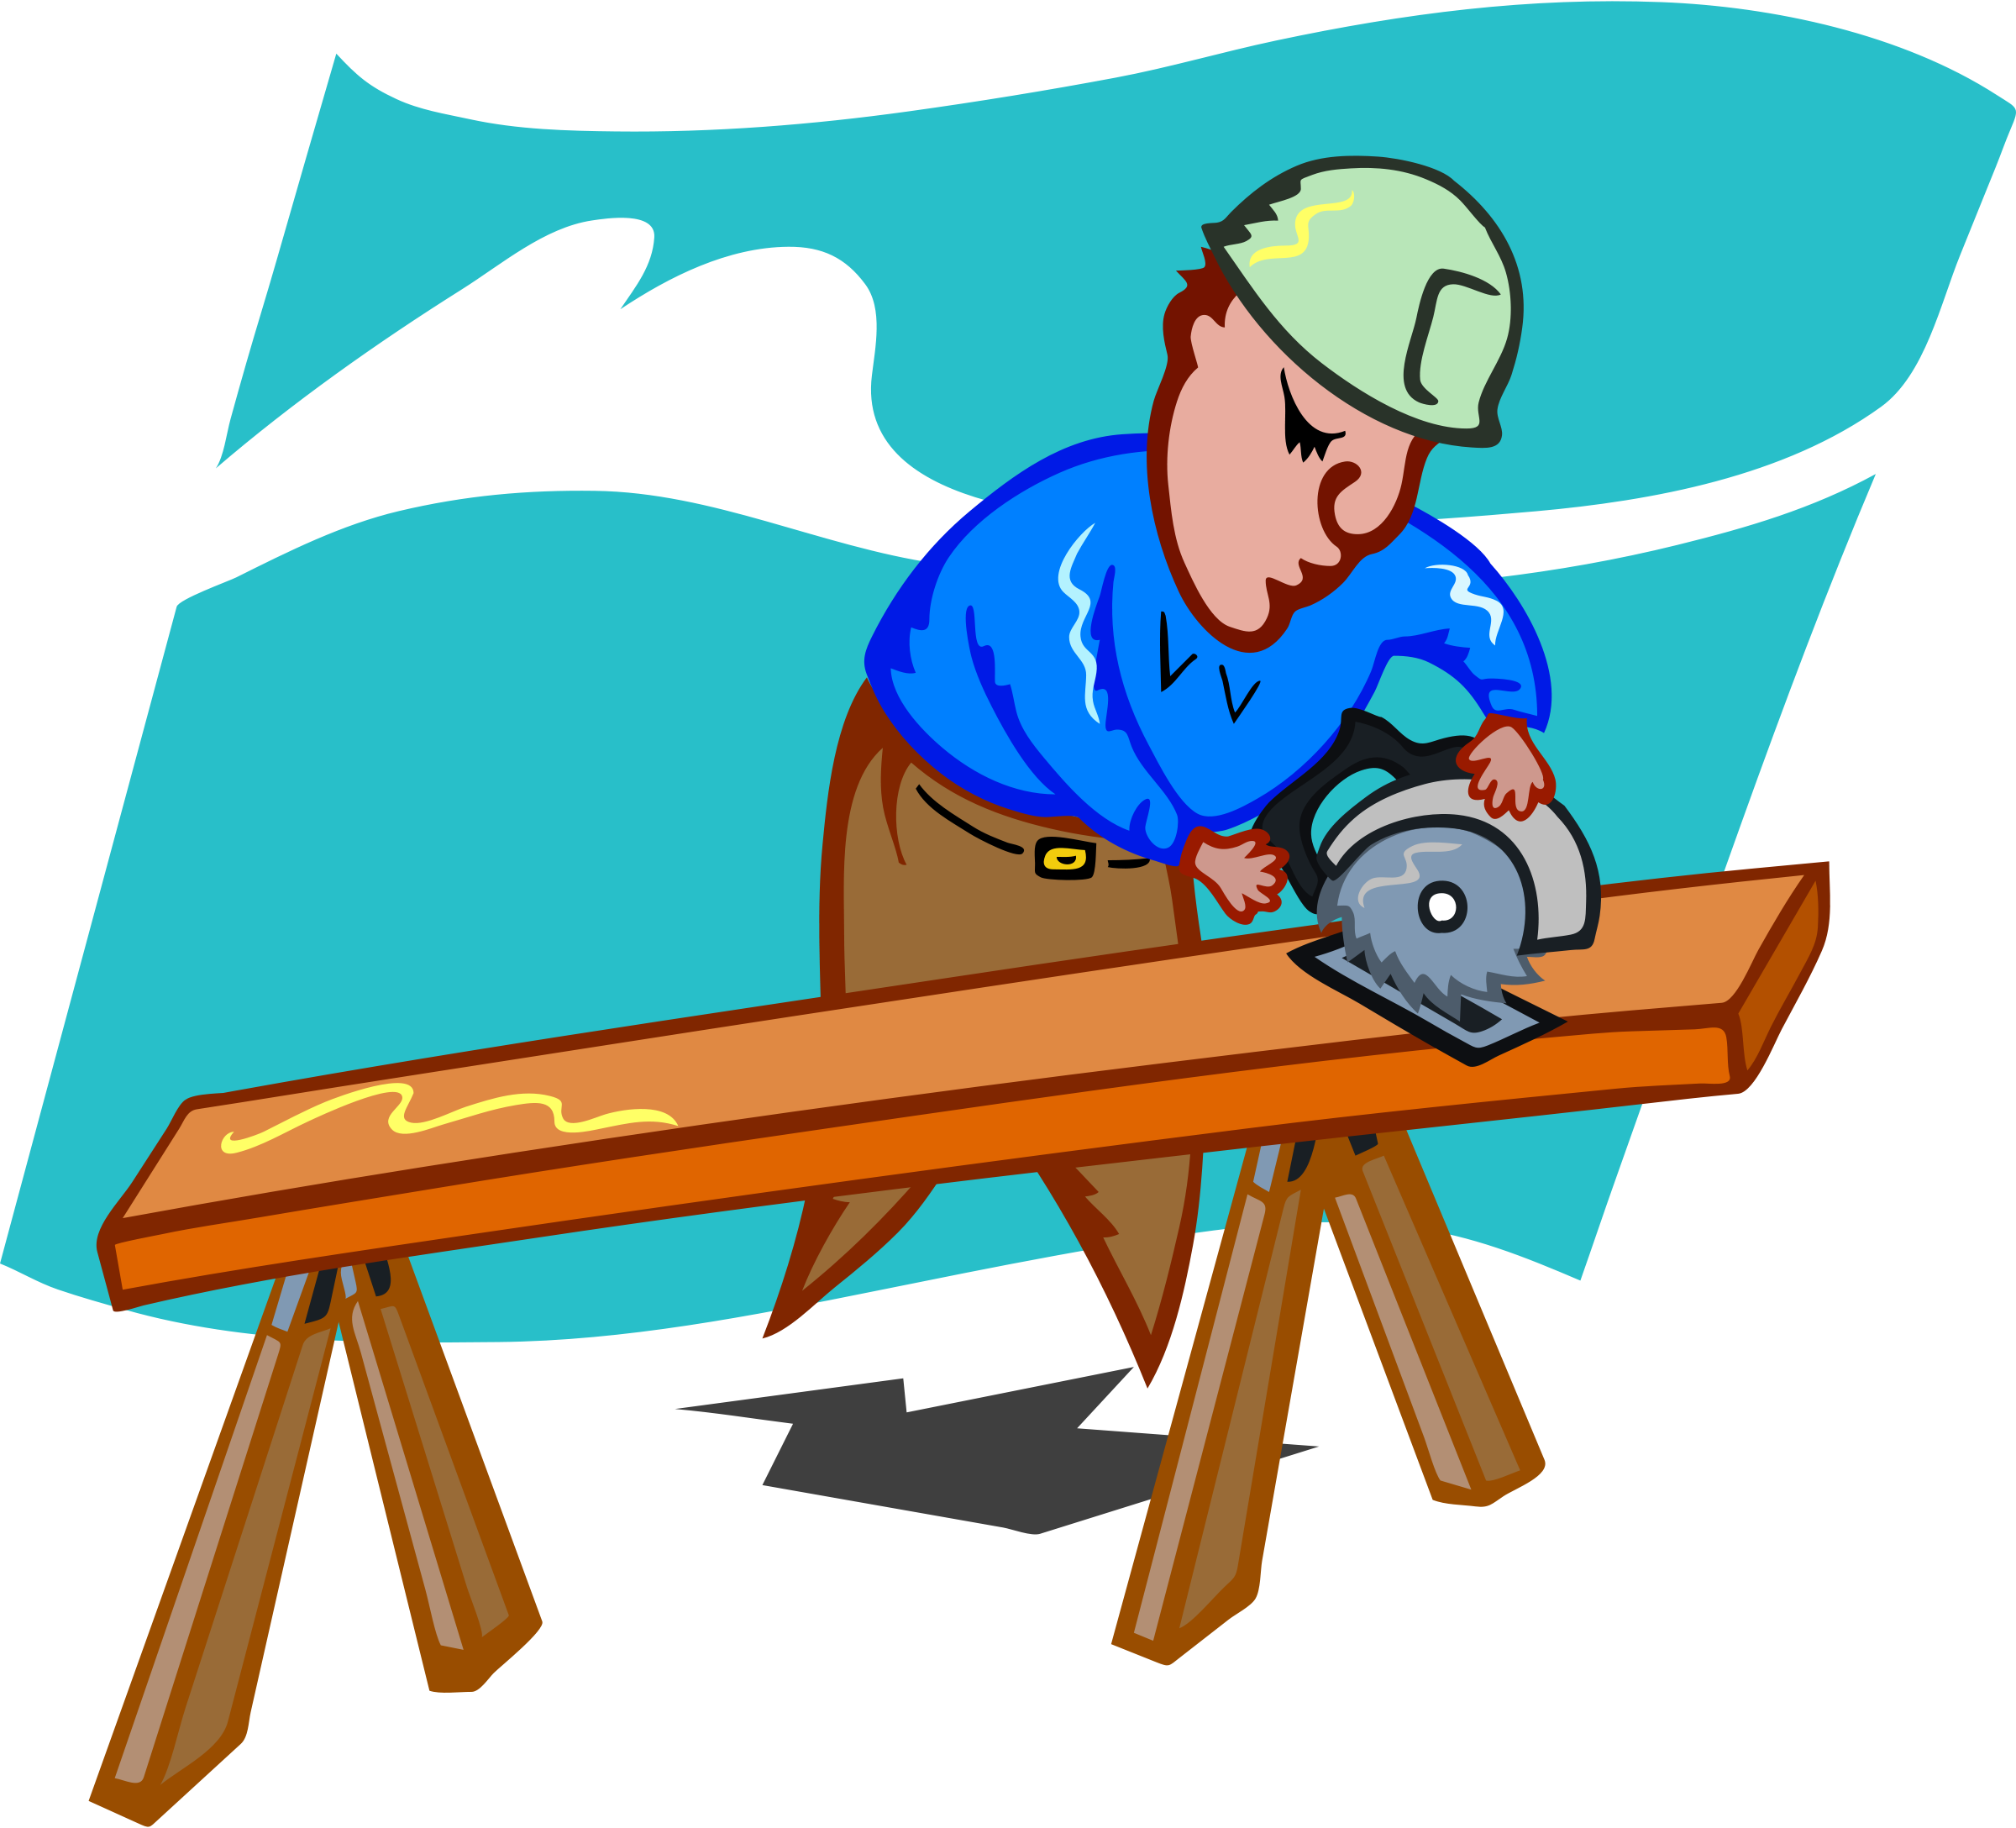 Carpentry Png Hd Transparent Carpentry Hdpng Images Pluspng